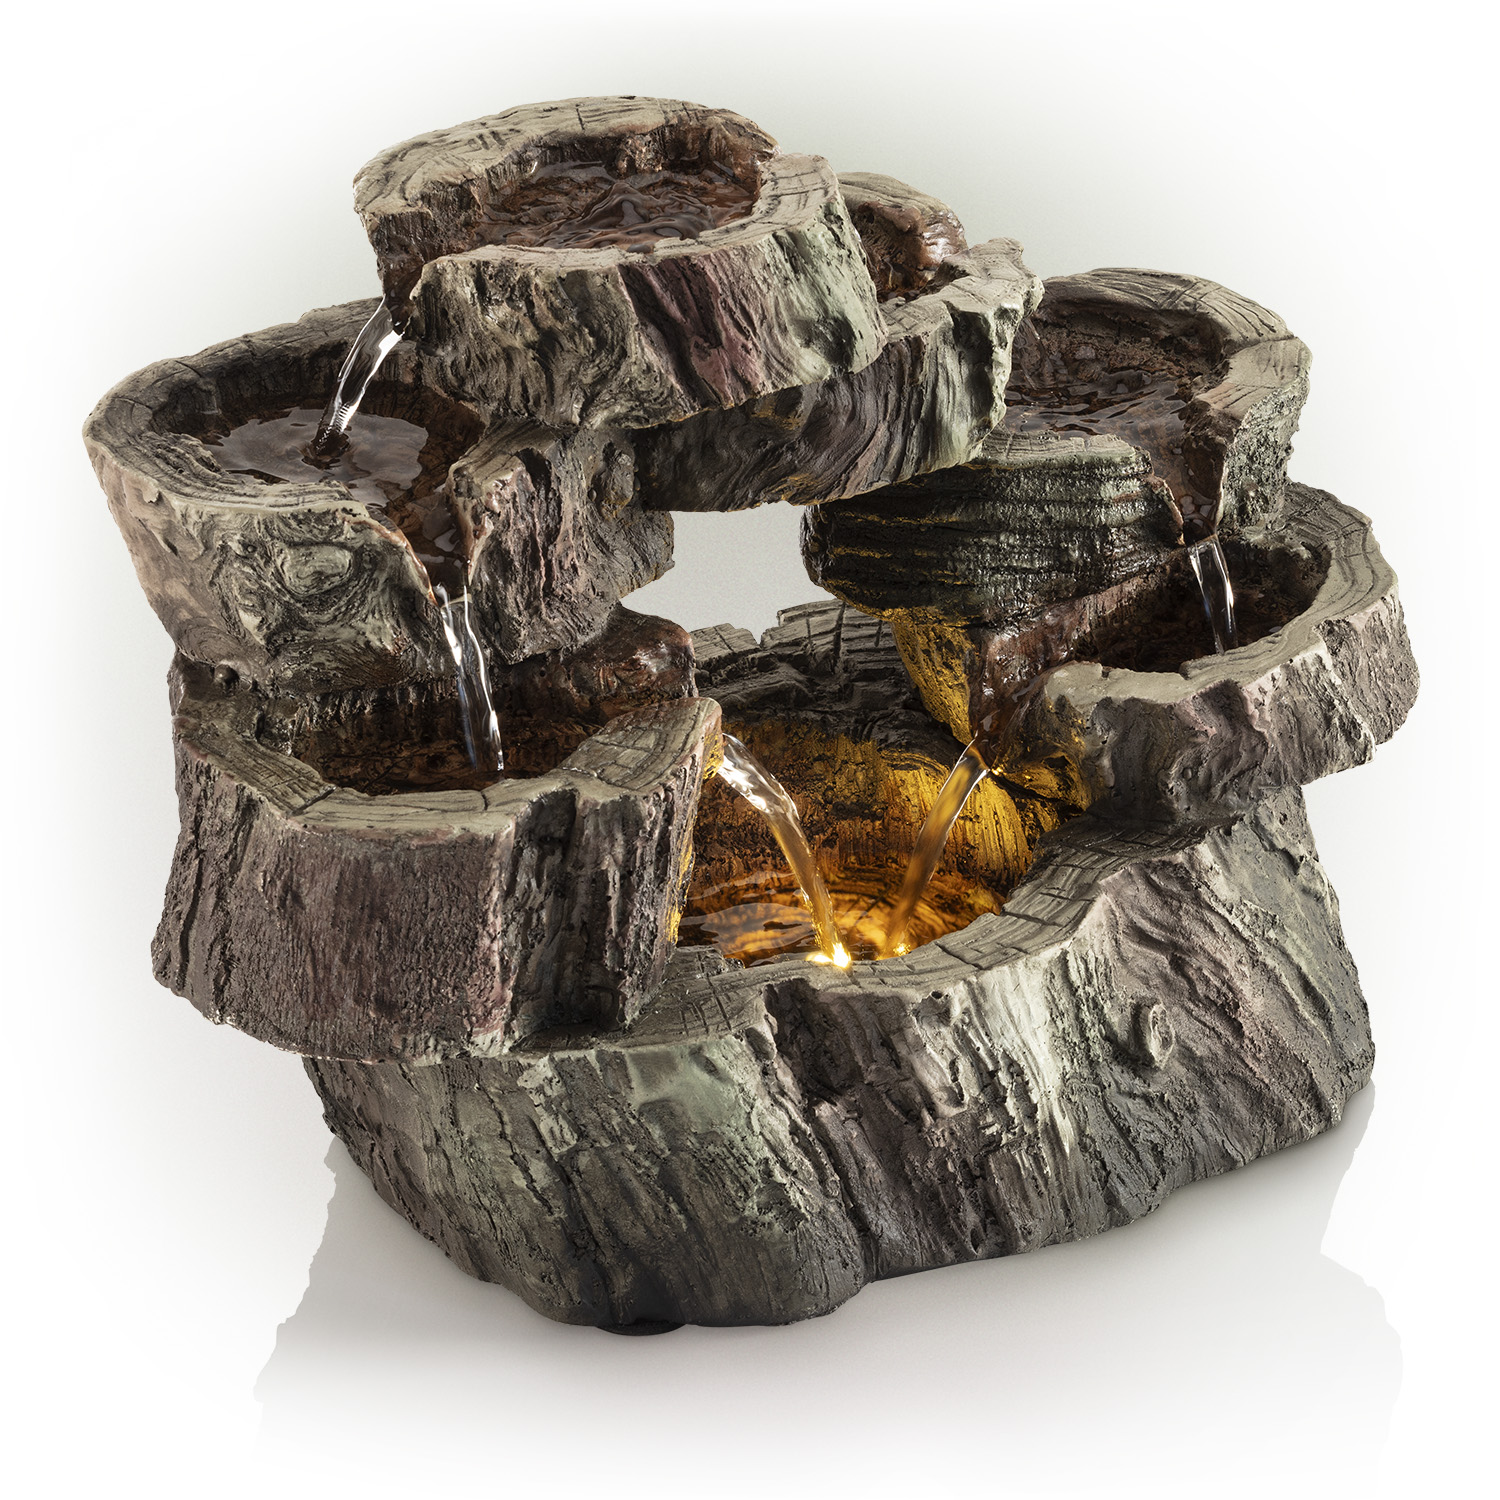 Alpine Corporation Circular Stone Looking Tiered Fountain, 9 inch Tall - image 3 of 12